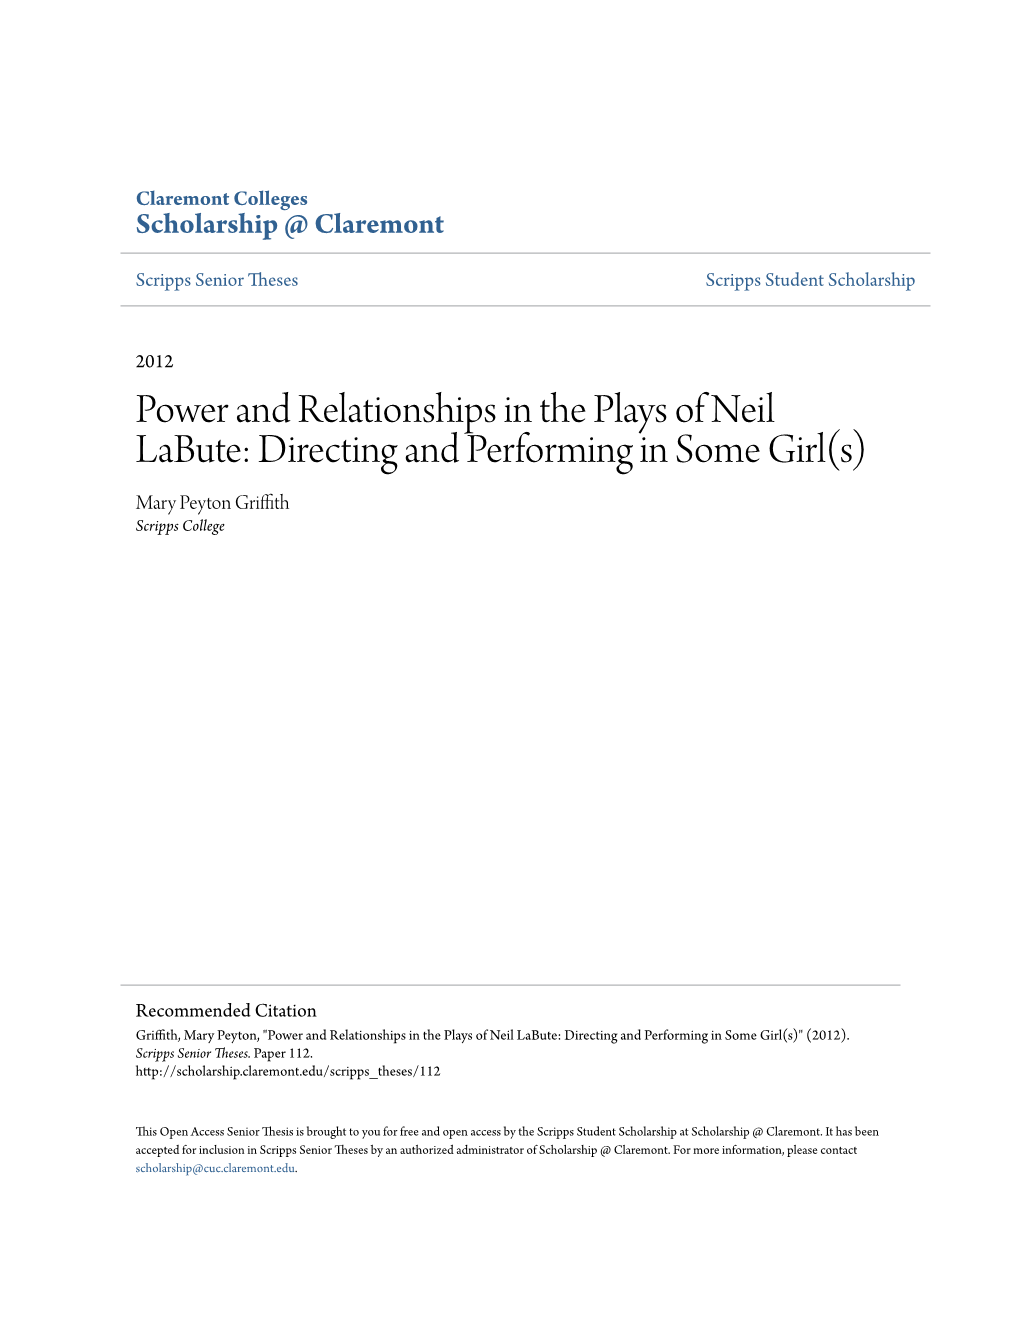 Power and Relationships in the Plays of Neil Labute: Directing and Performing in Some Girl(S) Mary Peyton Griffith Scripps College